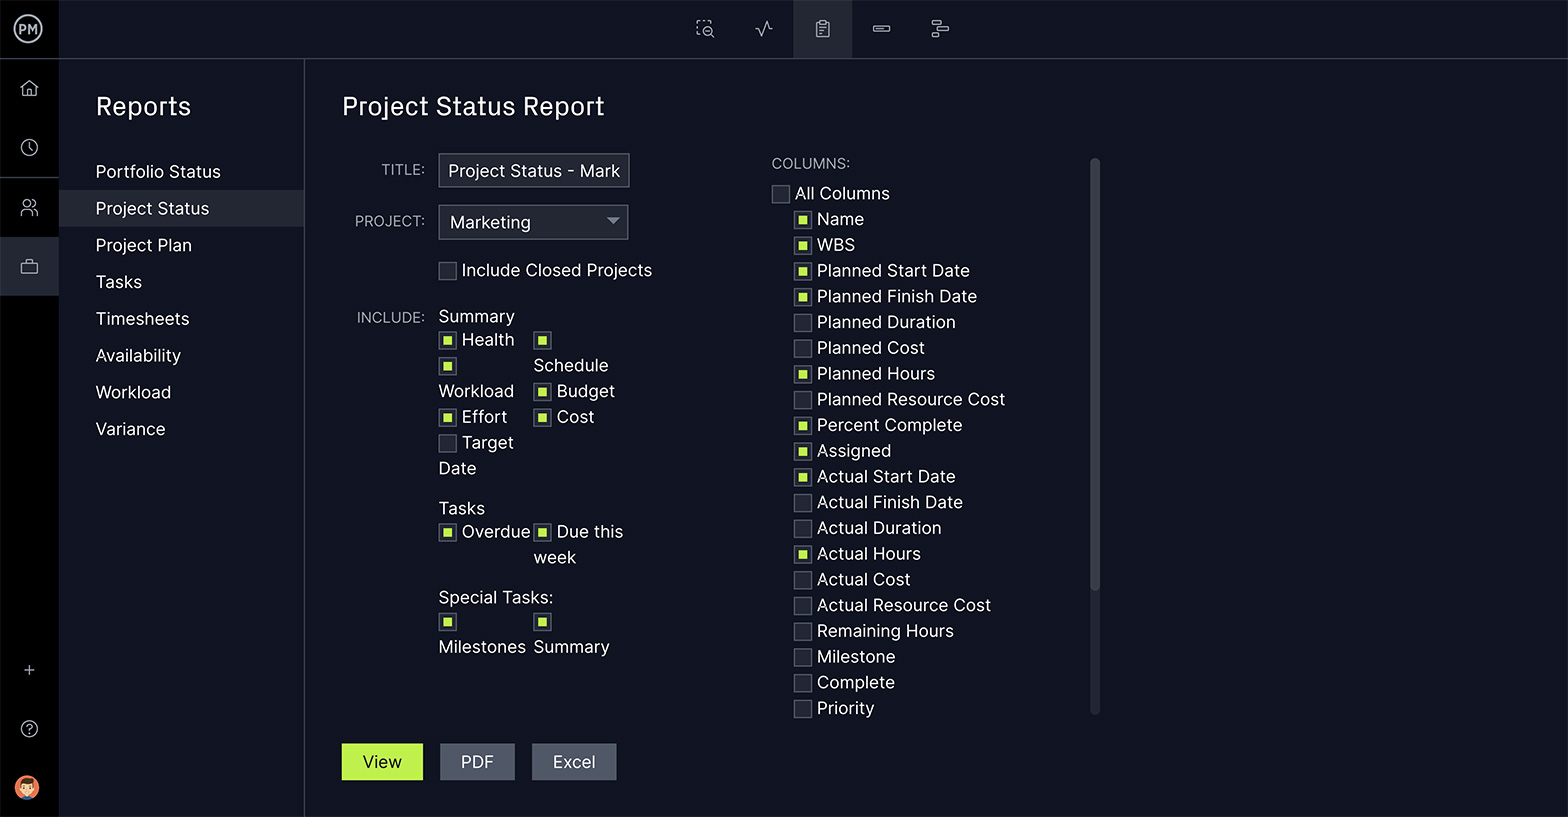 ProjectManager's project status report, a great program management tool